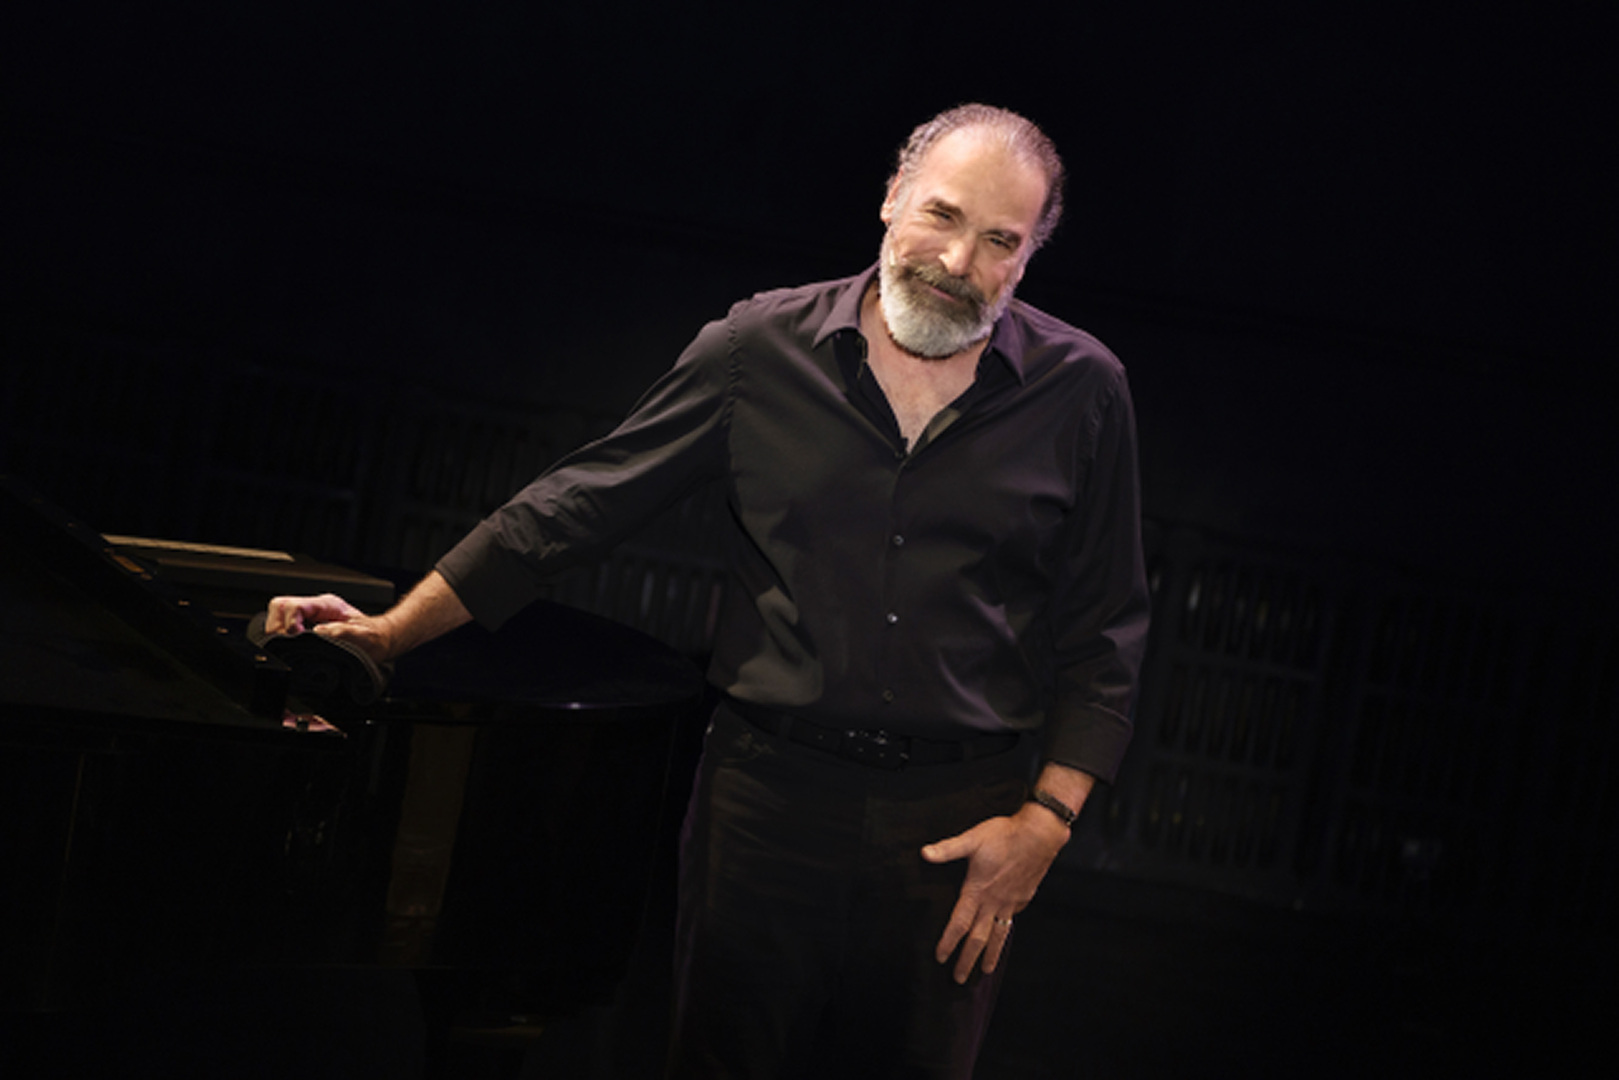 Mandy Patinkin in Concert: Being Alive with Adam Ben-David on Piano, Tucson, Arizona, United States